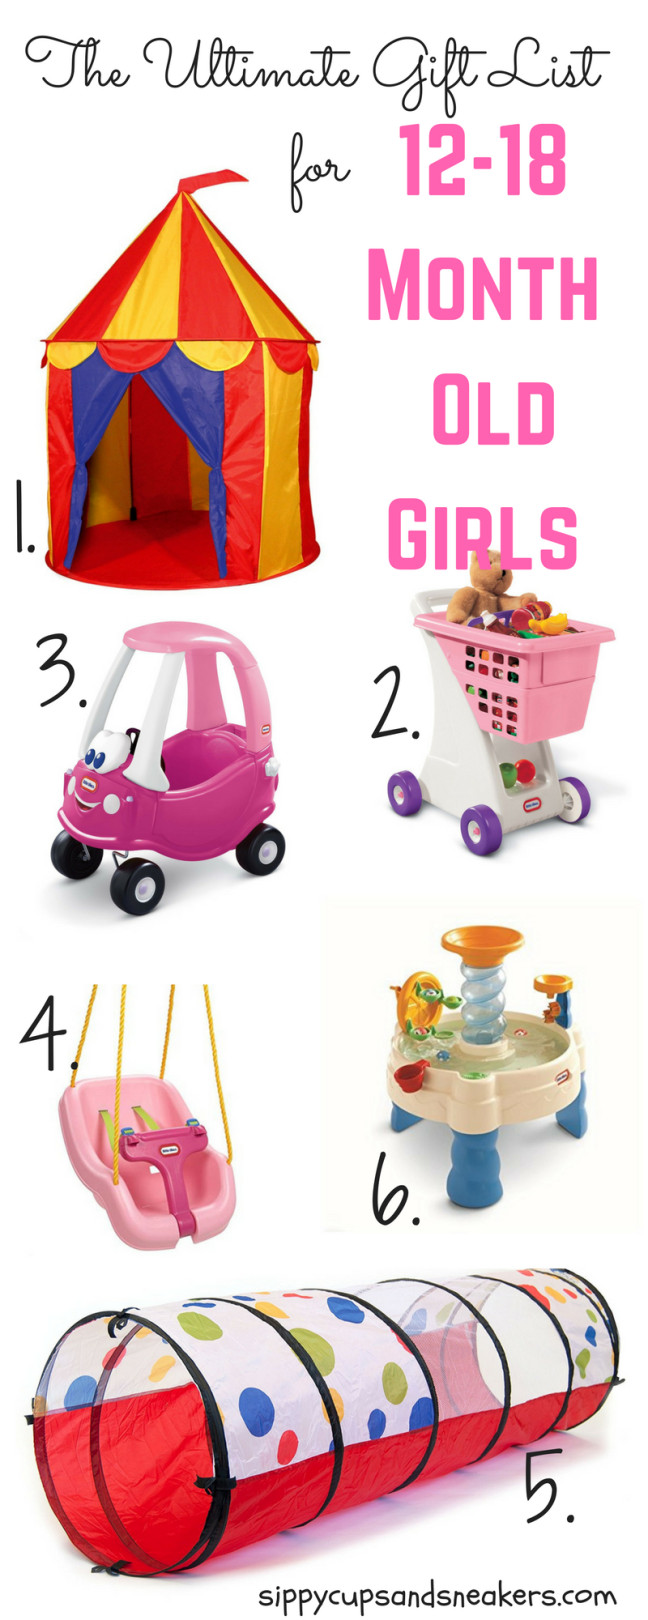 Christmas Gift Ideas For 18 Month Old Girl
 The Ultimate Gift List for 12 18 Month Old Girls